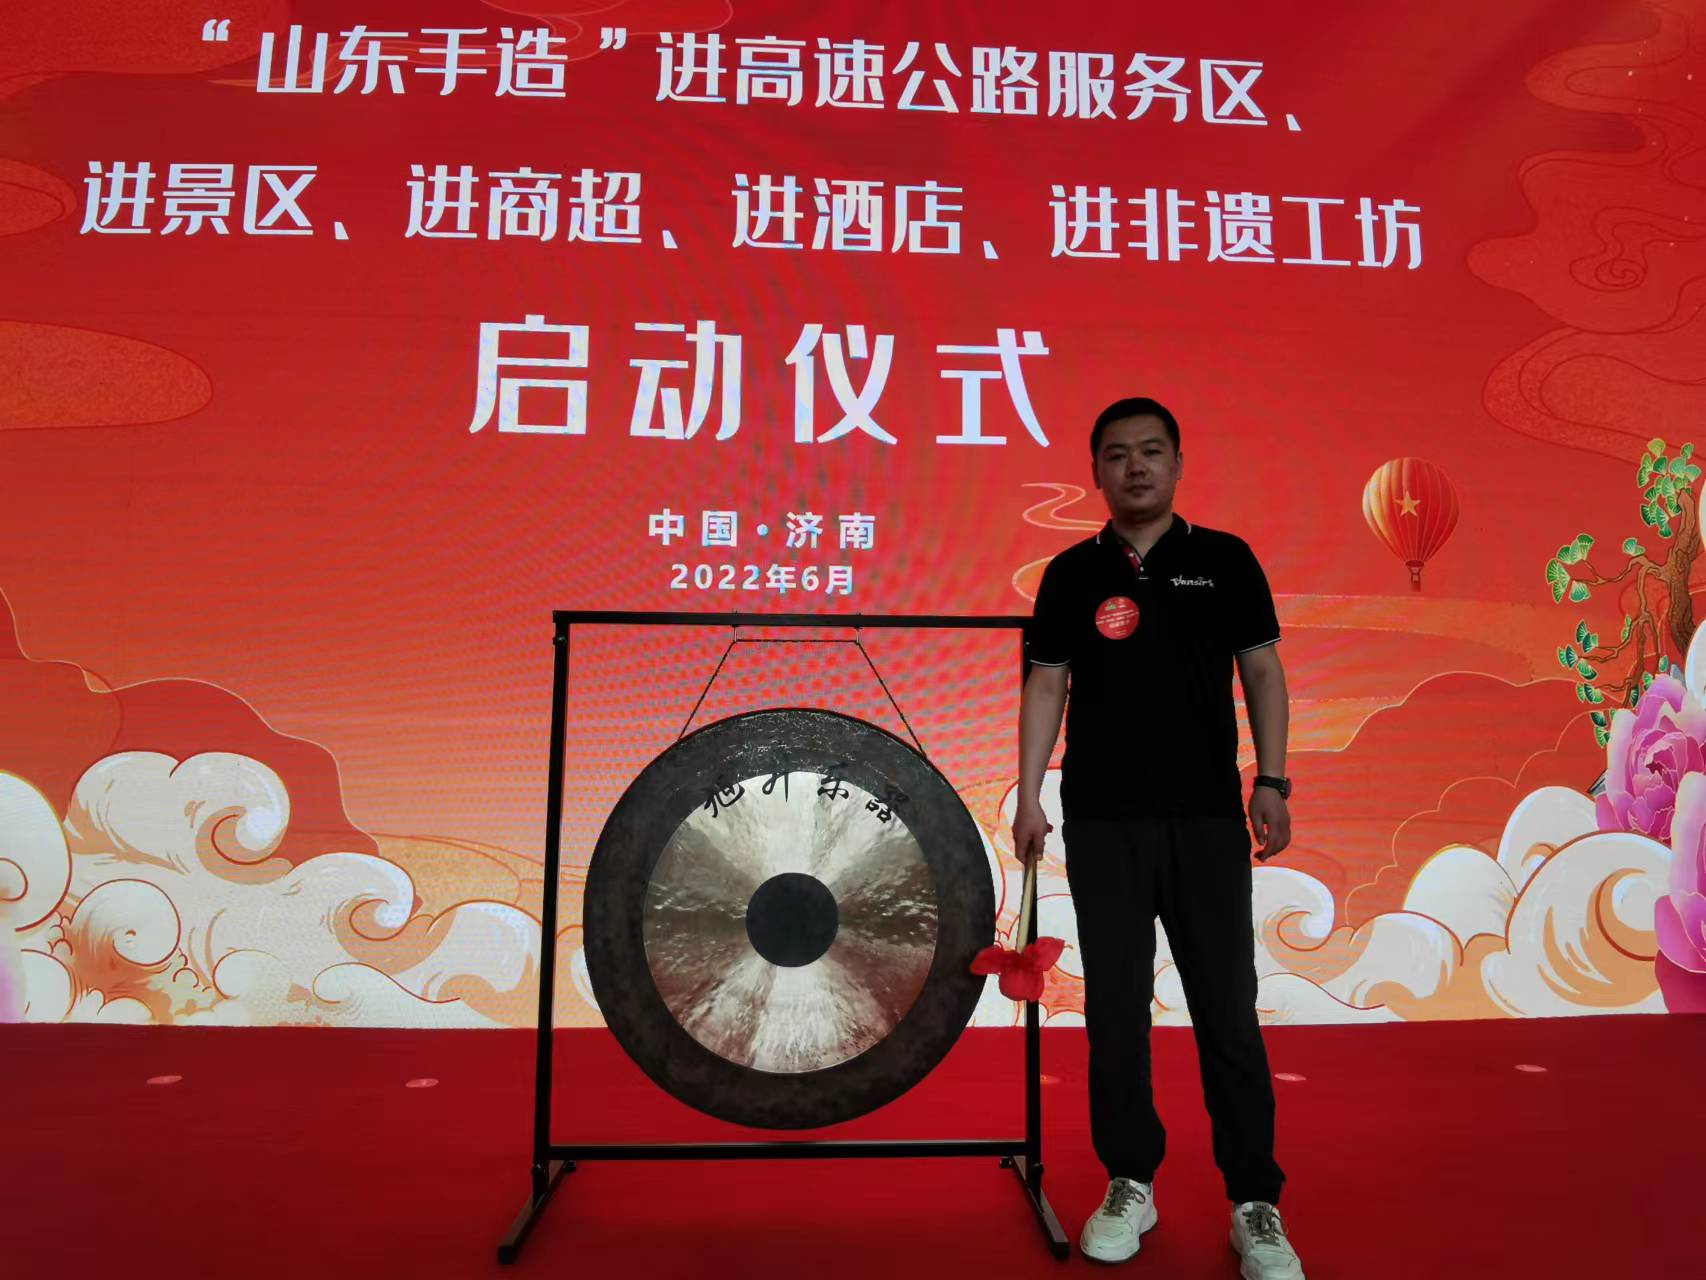 Vansir Handmade Gong Participated in 2022 Shandong Handmade Crafts. Top 100 Product Competition